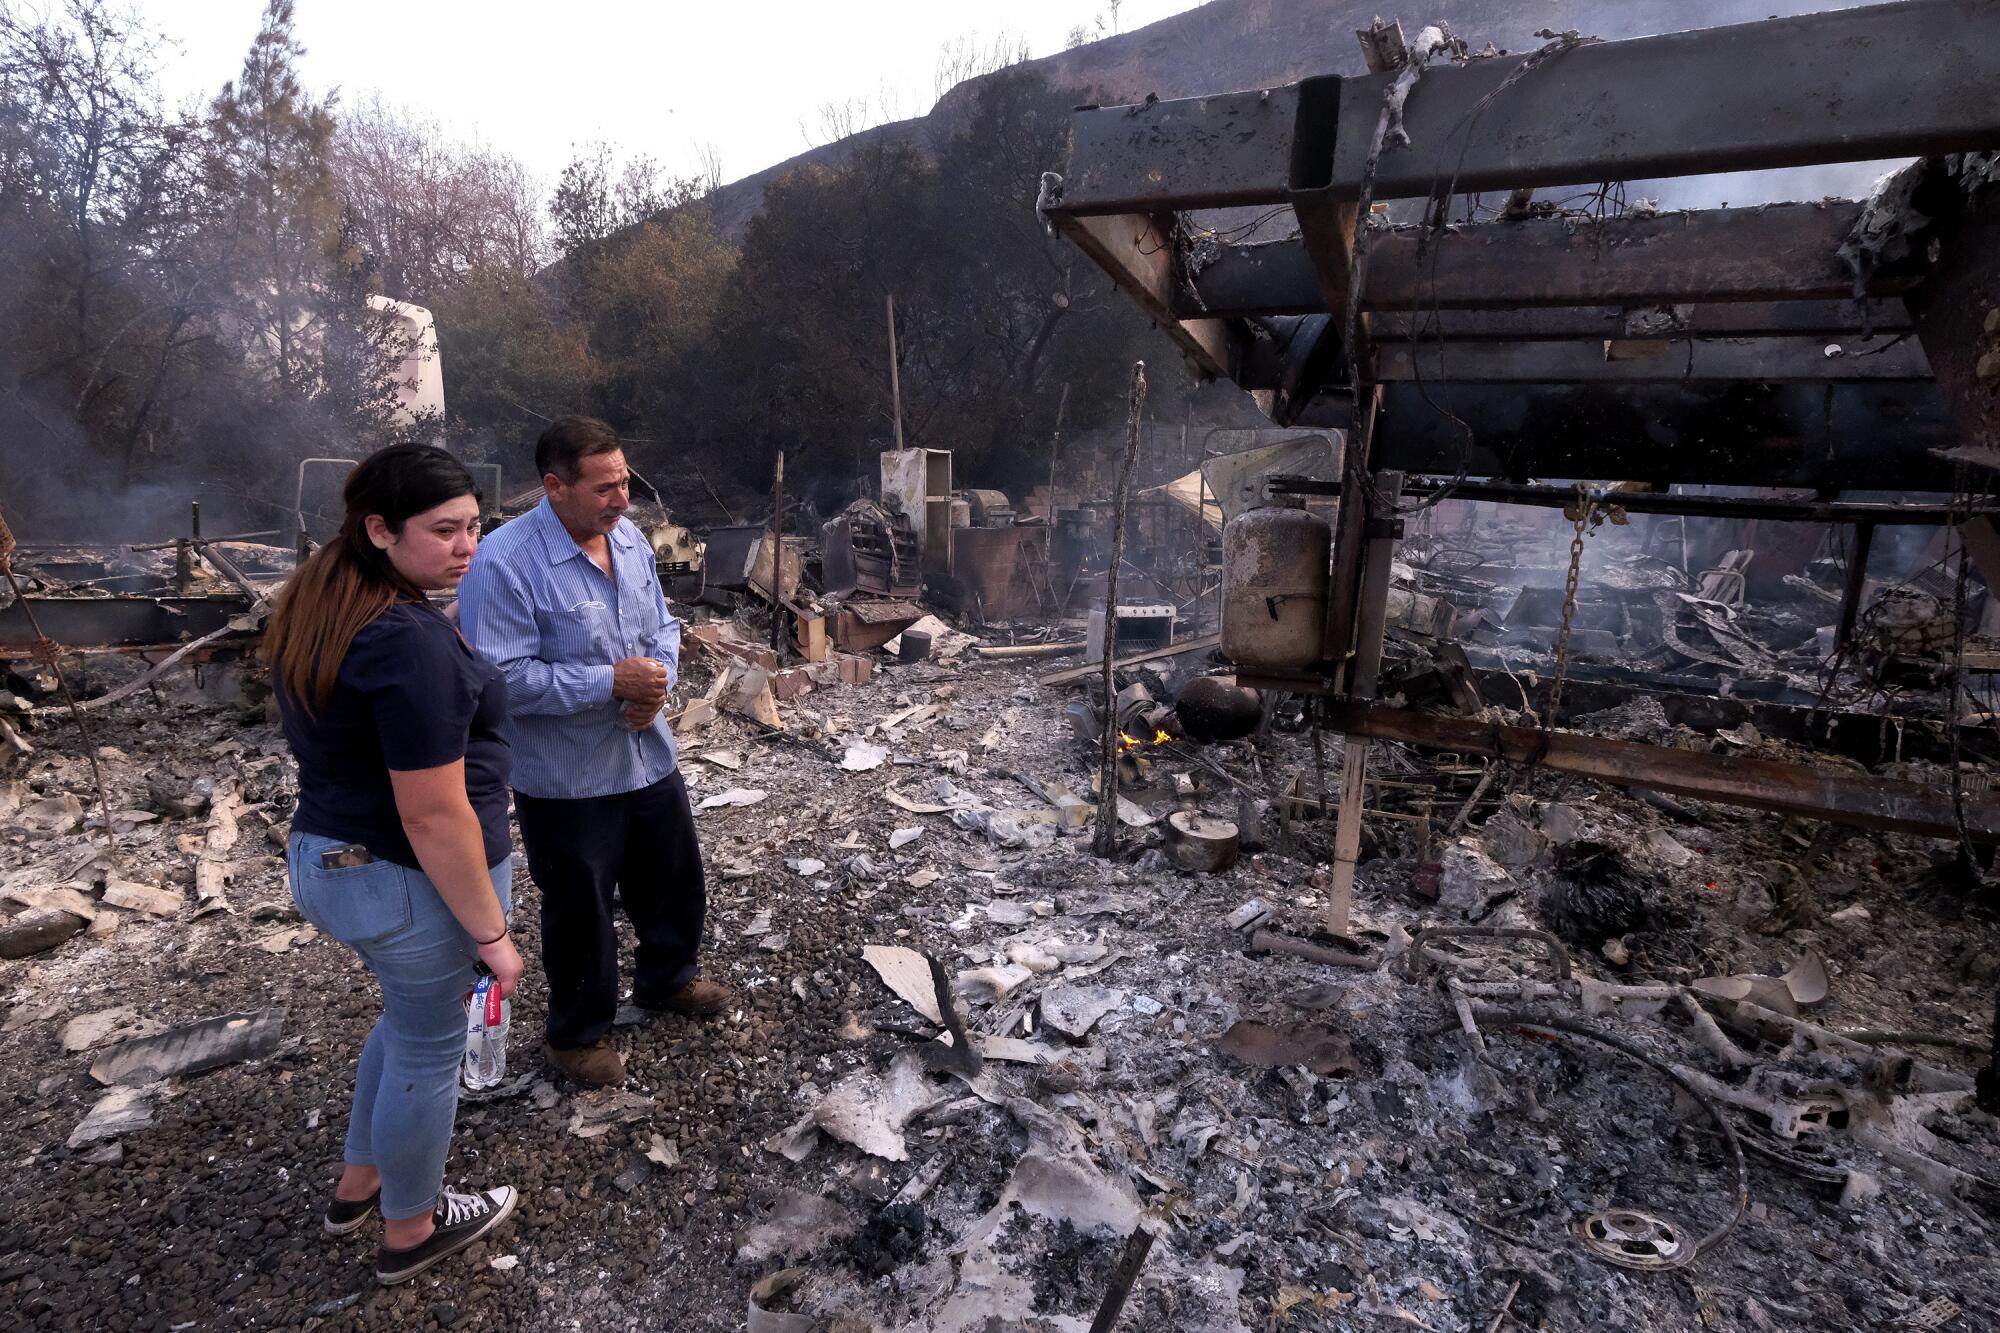 Jose Lamas and his daughter Astrid Covarrubias survey the charred debris of his burned-out home from the South fire 